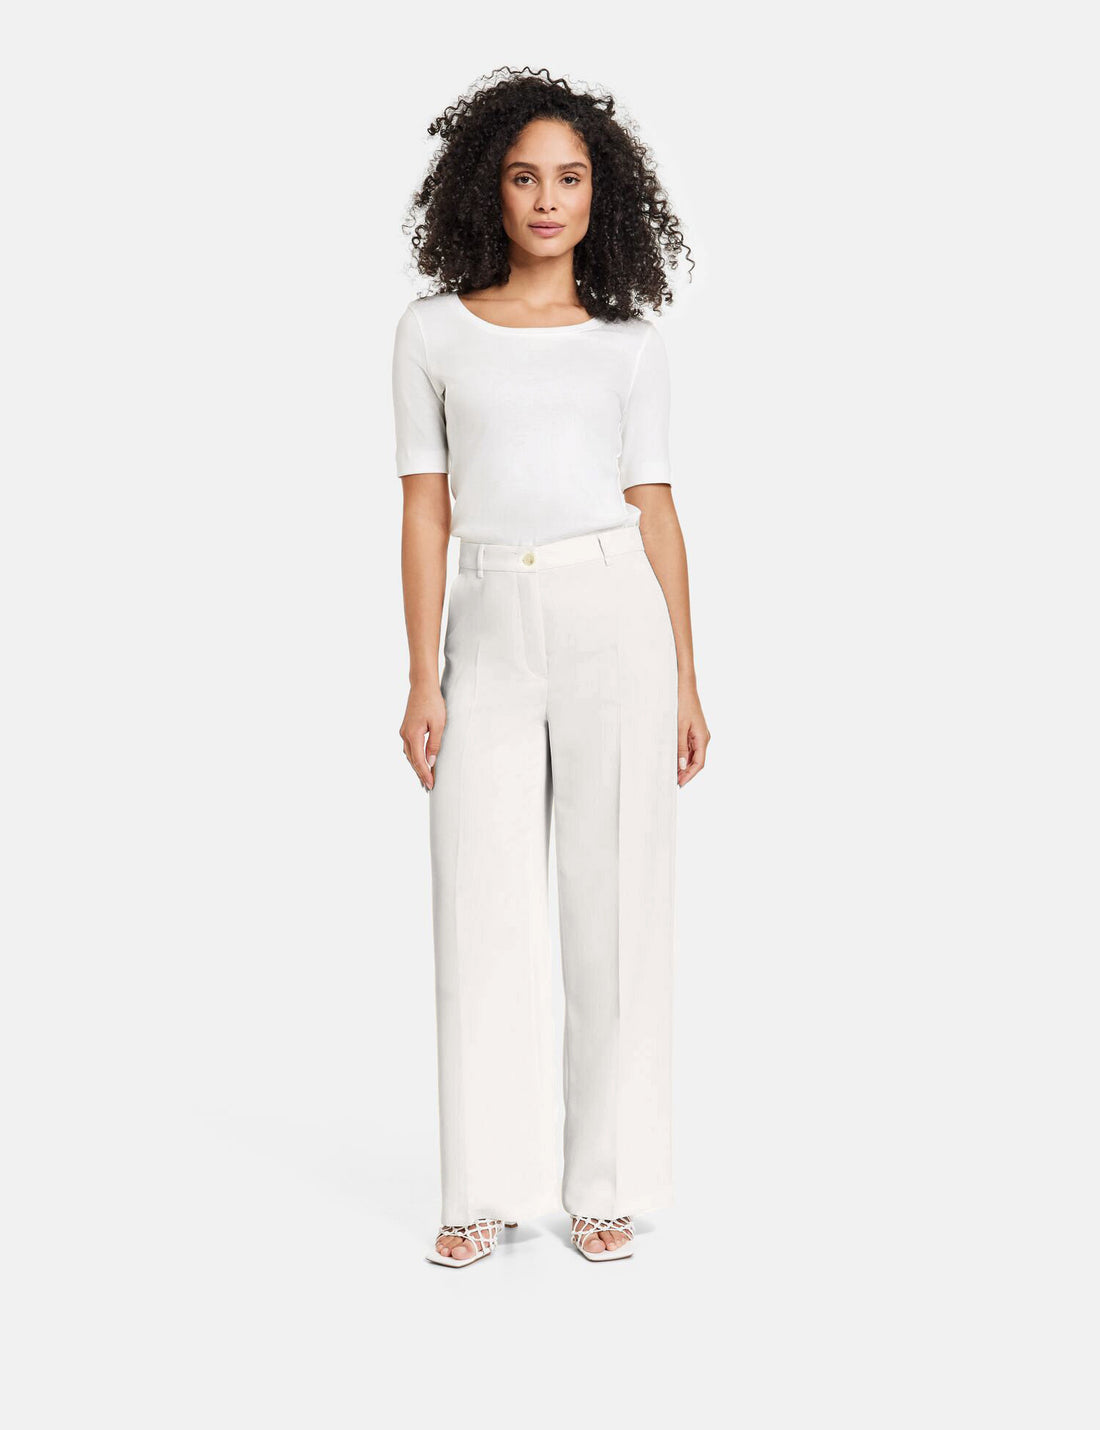 Flowing Trousers With Pressed Pleats_320025-31278_99700_01